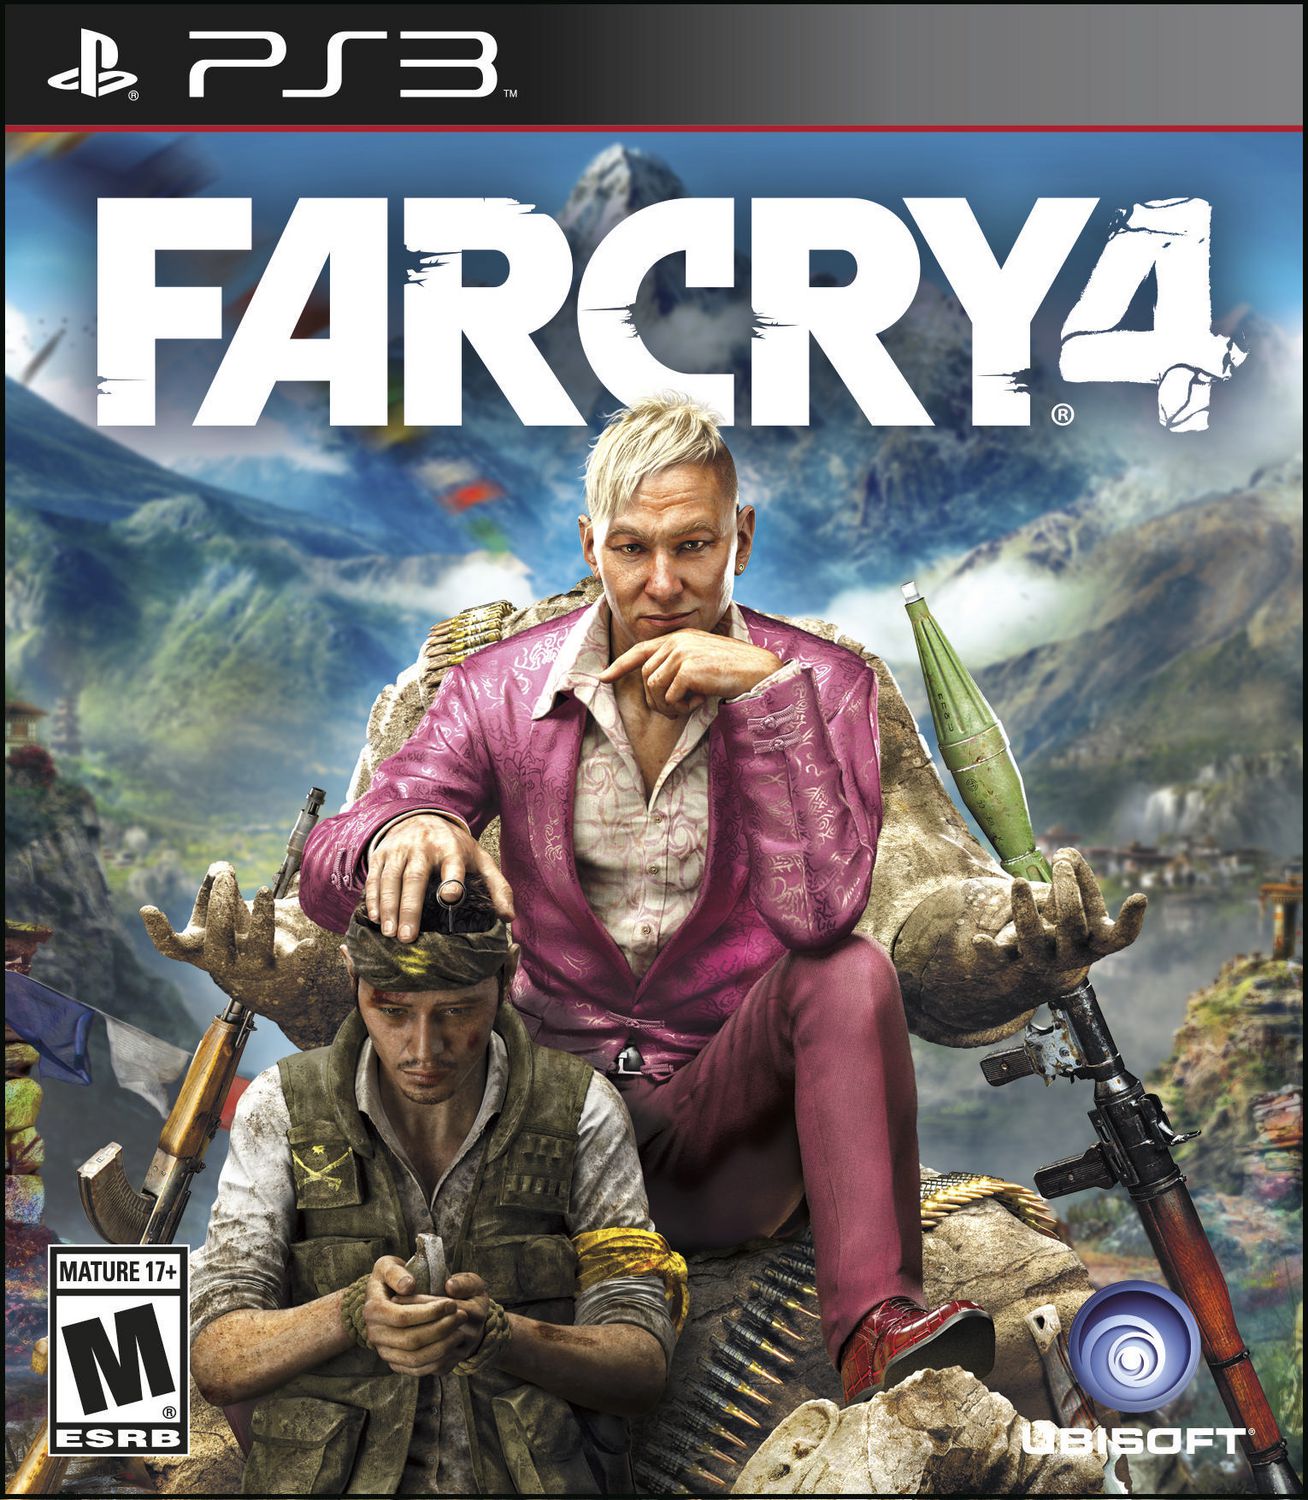 Far Cry 4 [9 GB] PS3 CFW INSIDE GAME